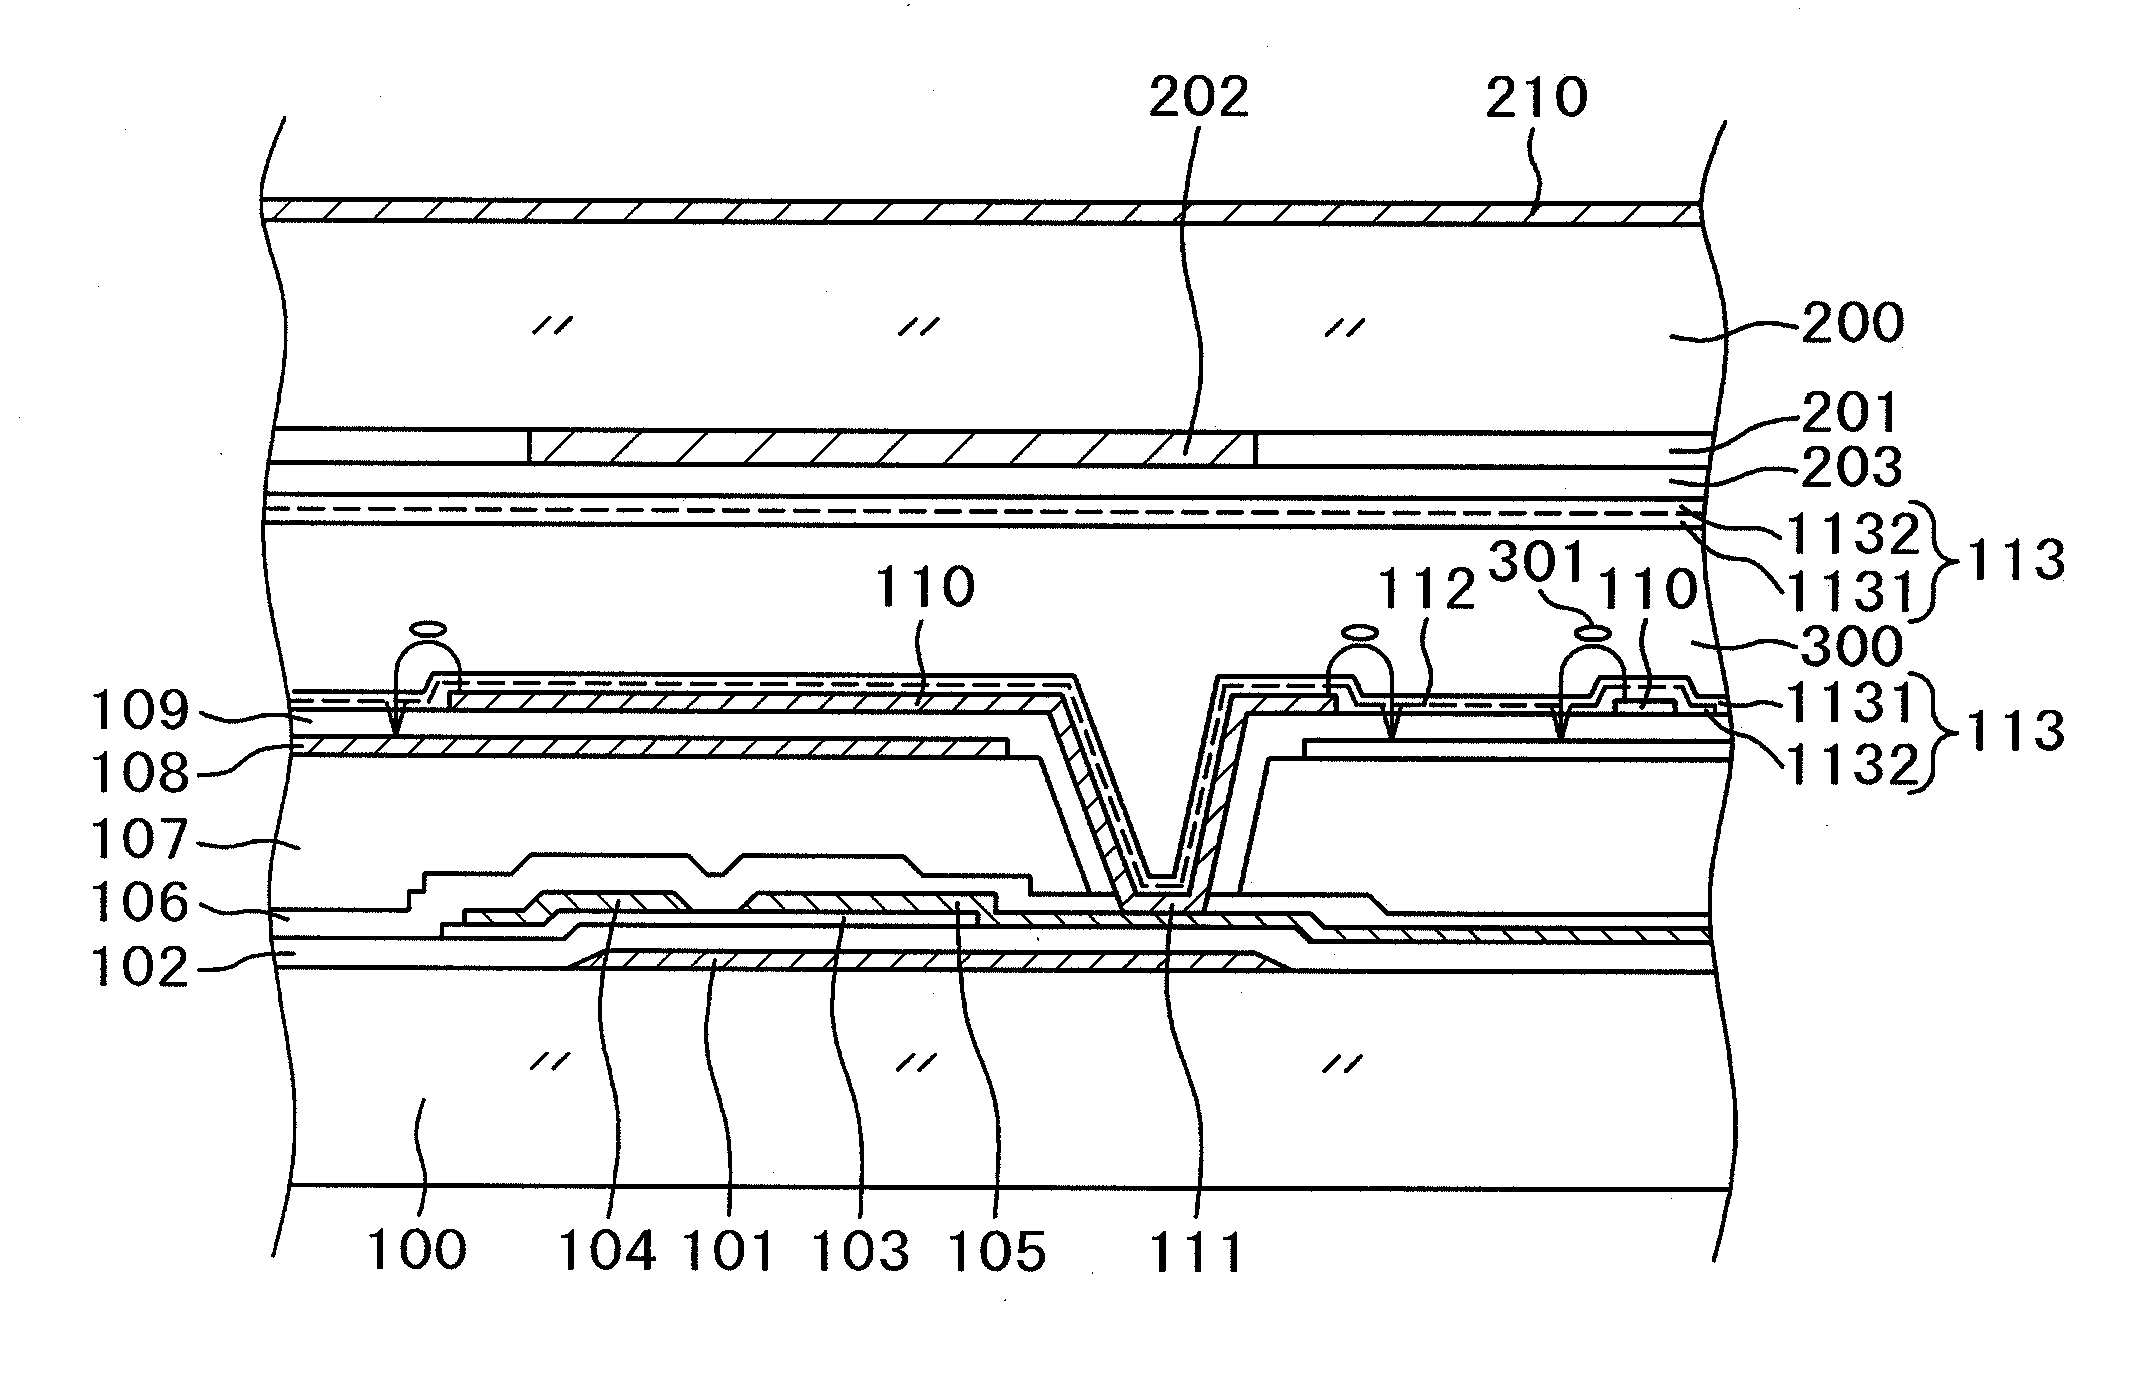 Liquid crystal display device comprising an alignment film that includes a first alignment film formed of a precursor of polyamide acid or polyamide acid ester and a second alignment film underlying the first alignment film wherein the first alignment film accounts for between 30% and 60% of the alignment film